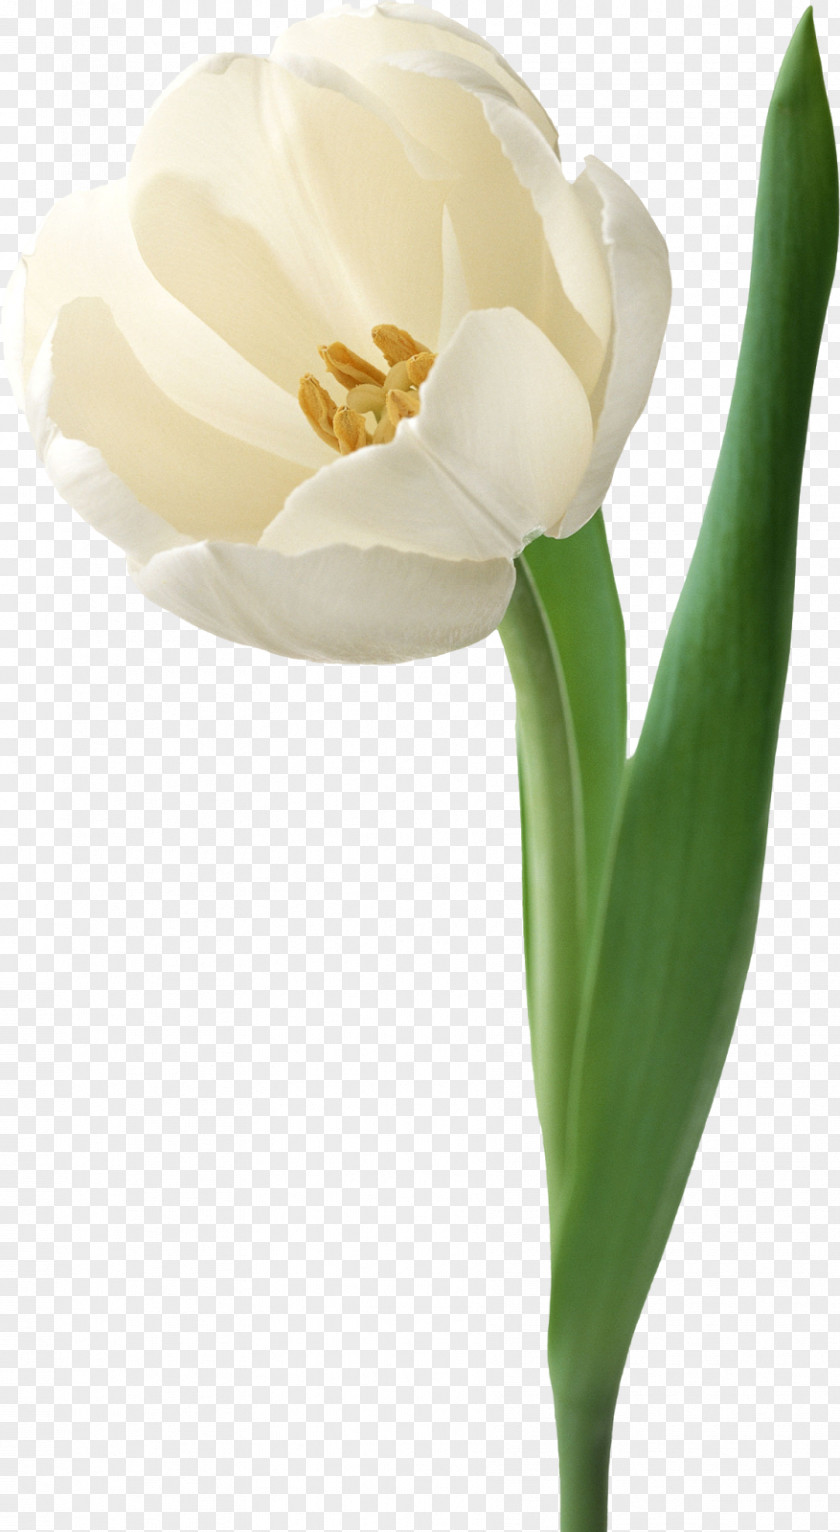 Daffodil Wall Decal Sticker Flower PNG